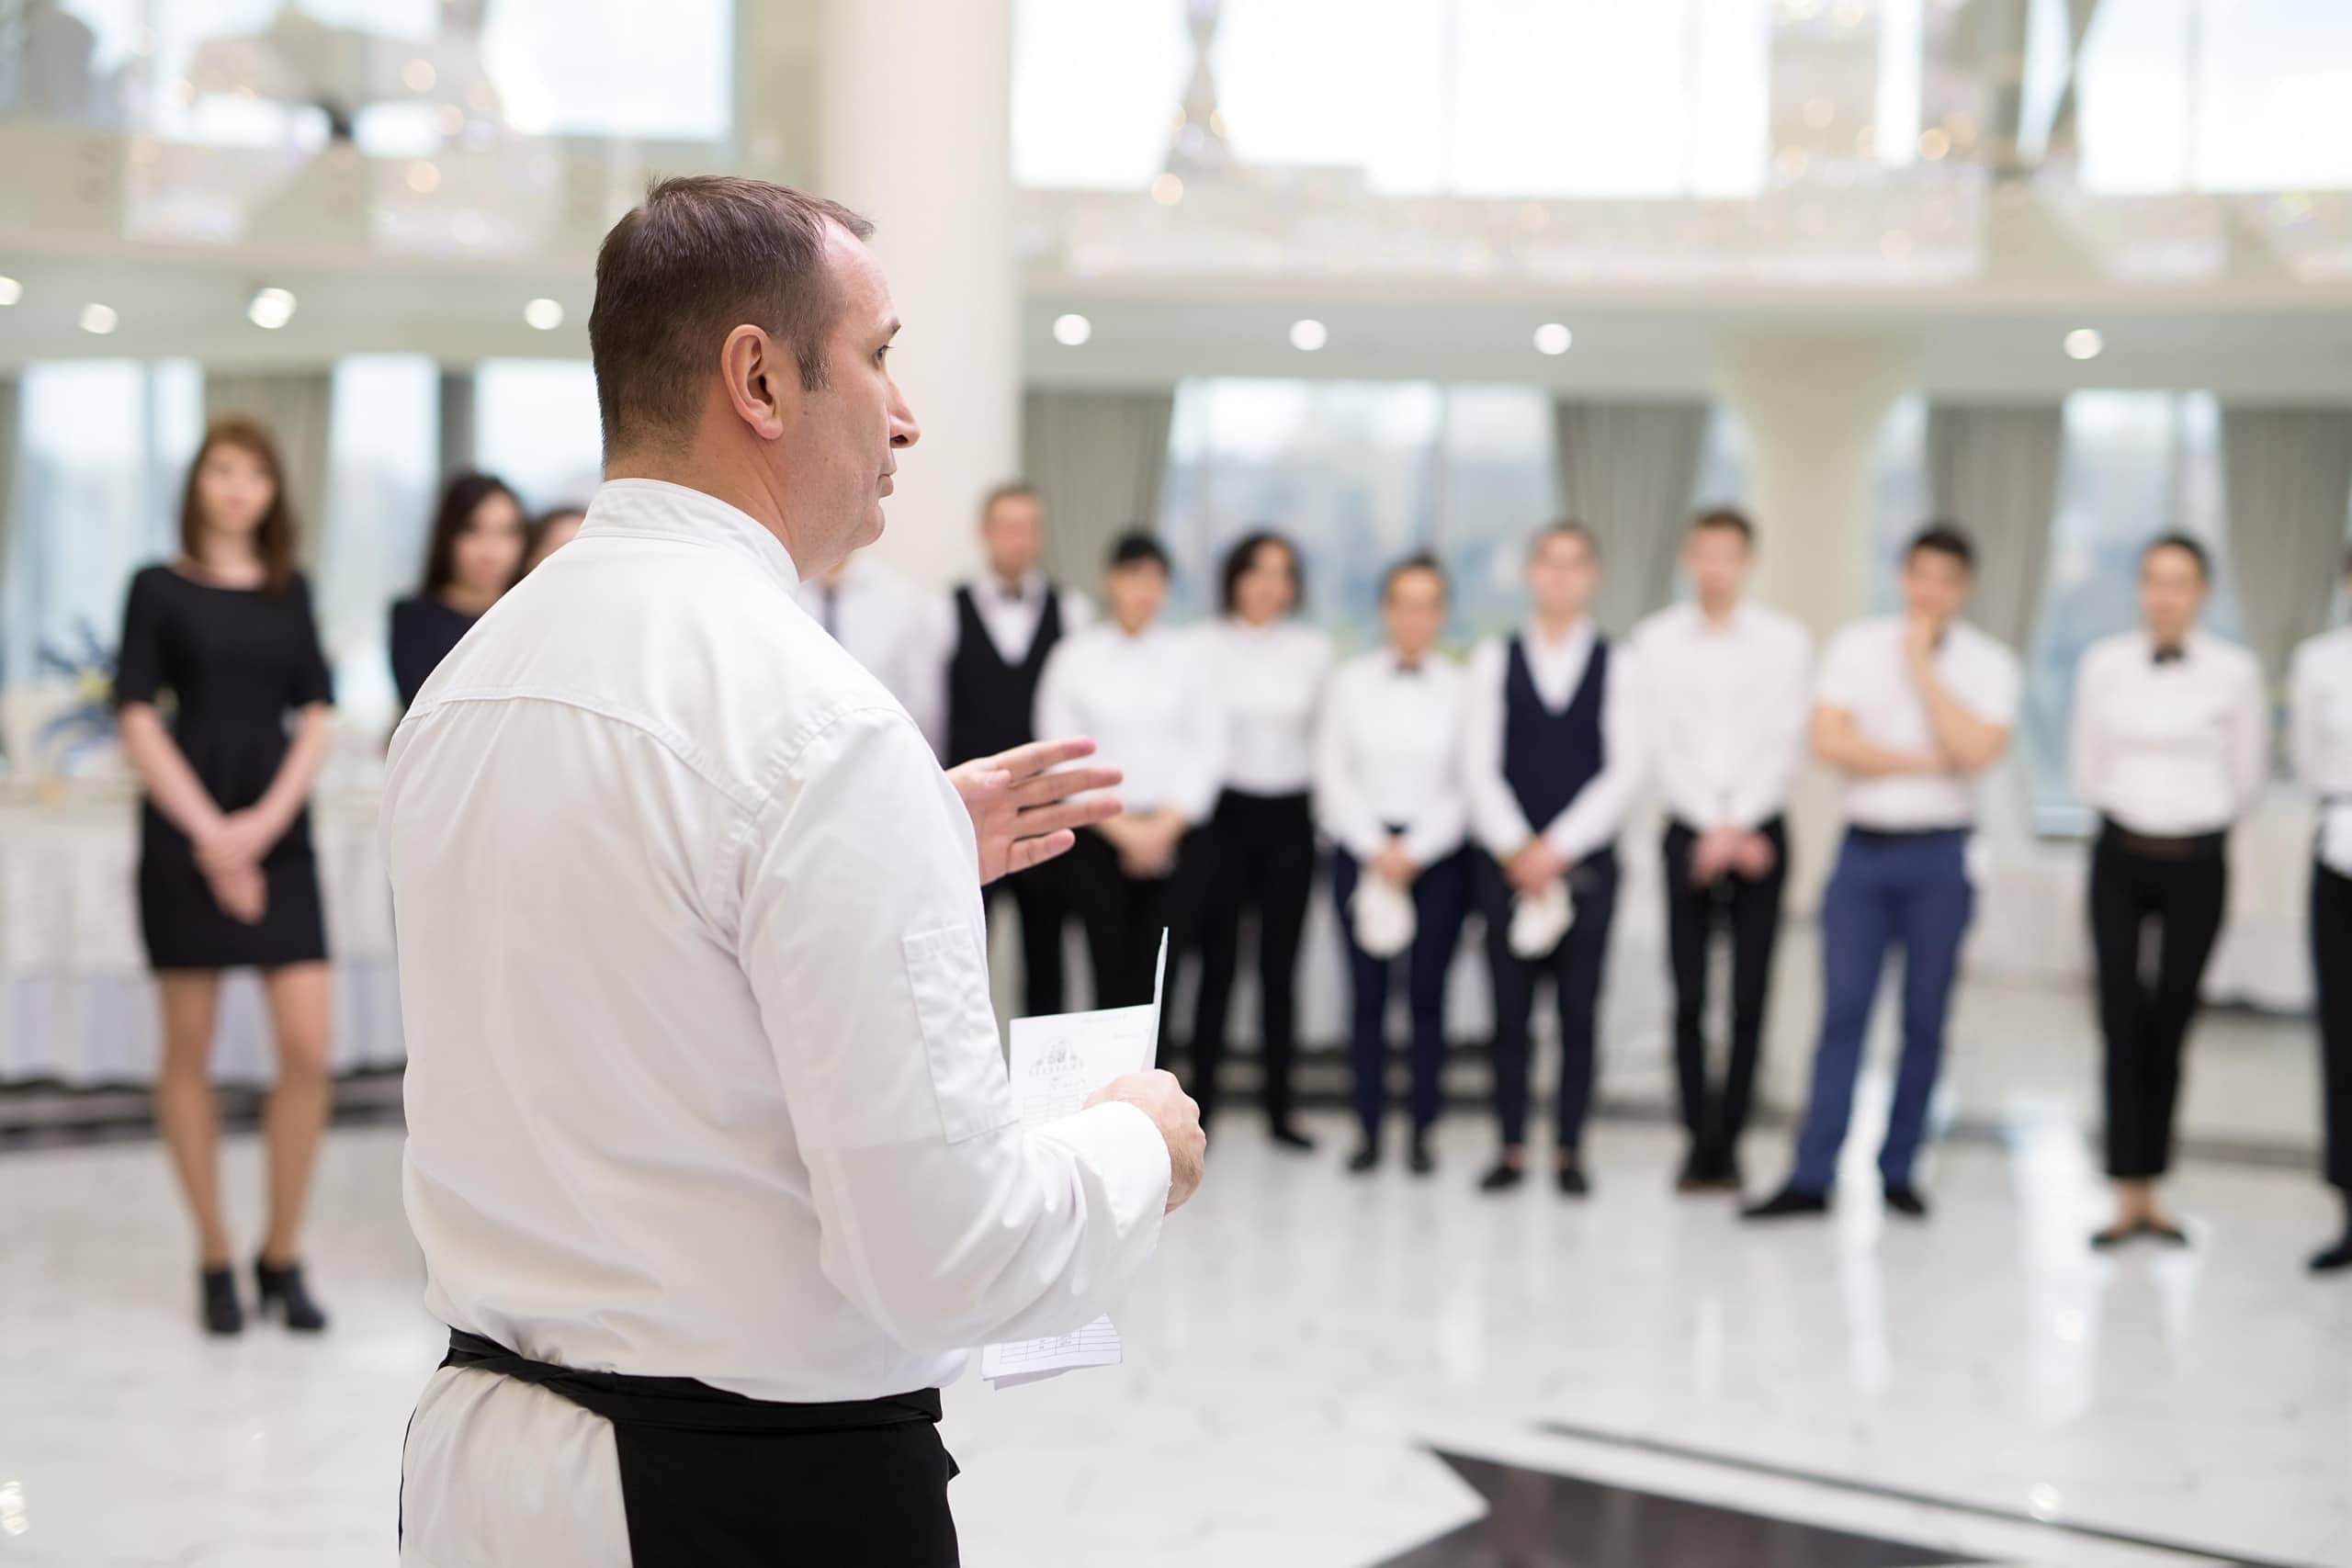 A chef standing in front of a group of professionals talking about food safety.